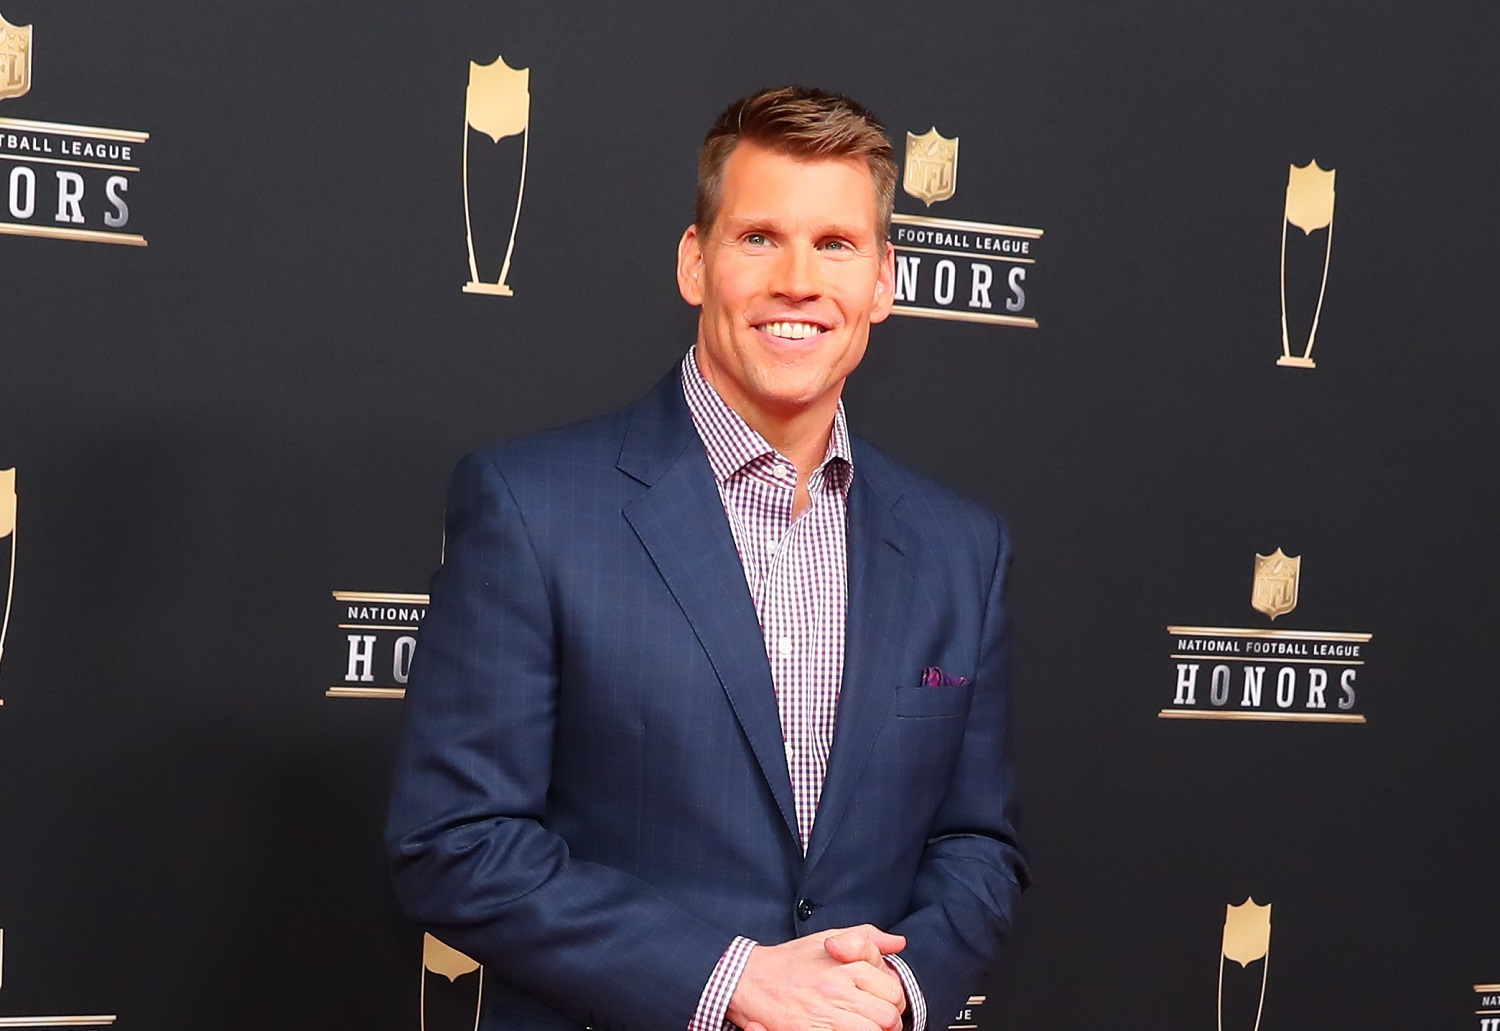 NFL RedZone host Scott Hanson poses on the red carpet at the NFL Honors on Feb. 2, 2019, in Atlanta, GA. | Rich Graessle/Icon Sportswire via Getty Images